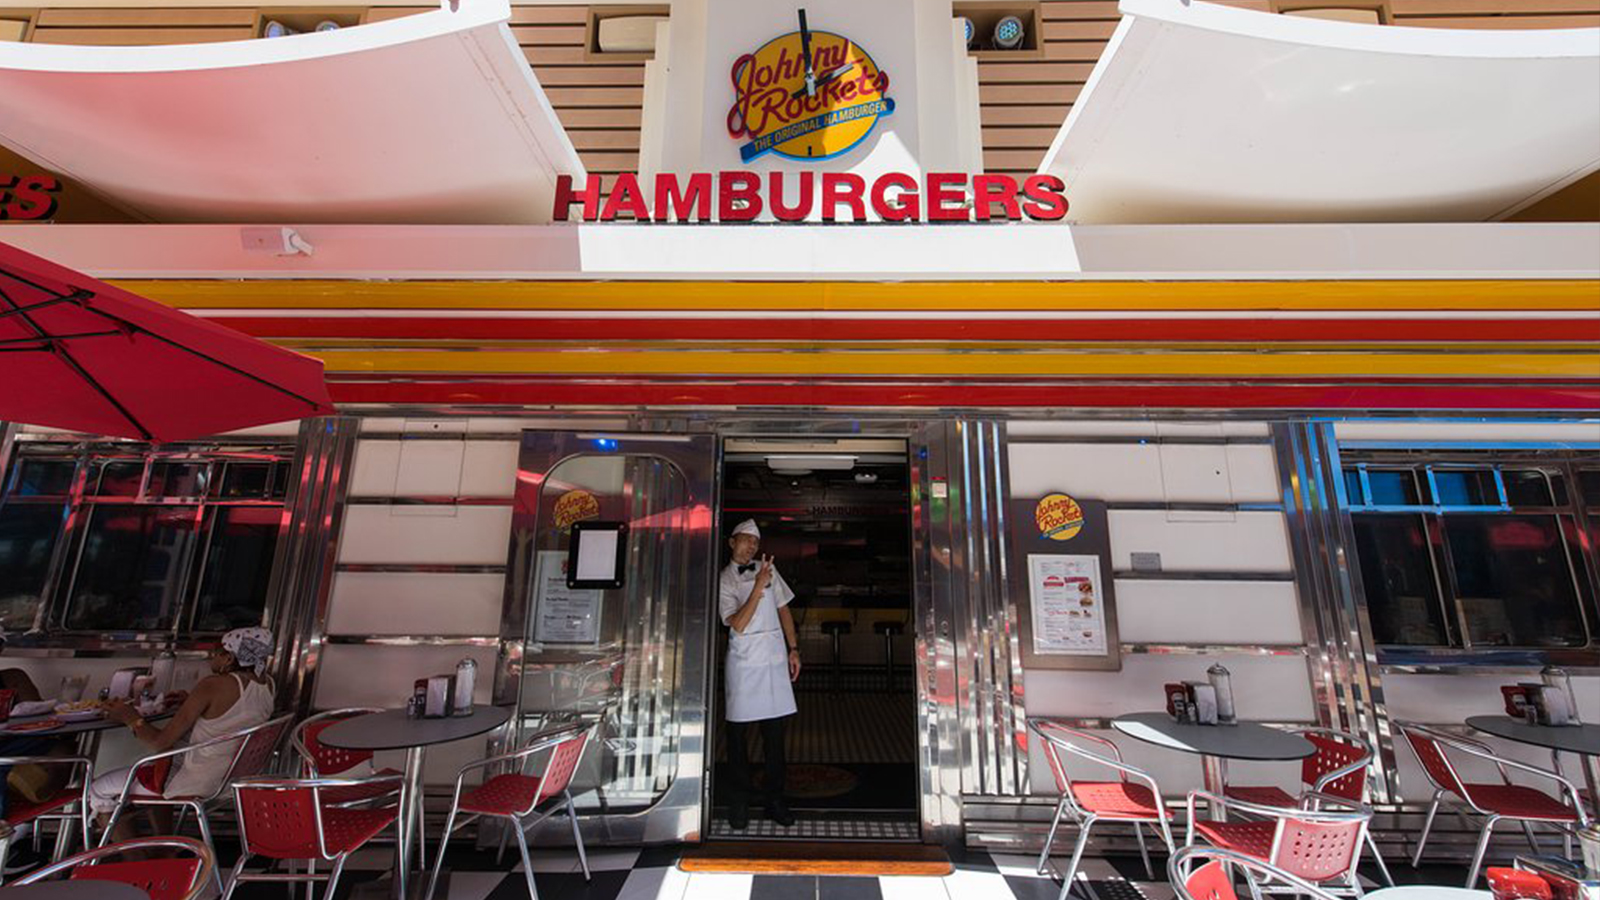 Johnny Rockets on the Royal Caribbean Oasis of the Seas